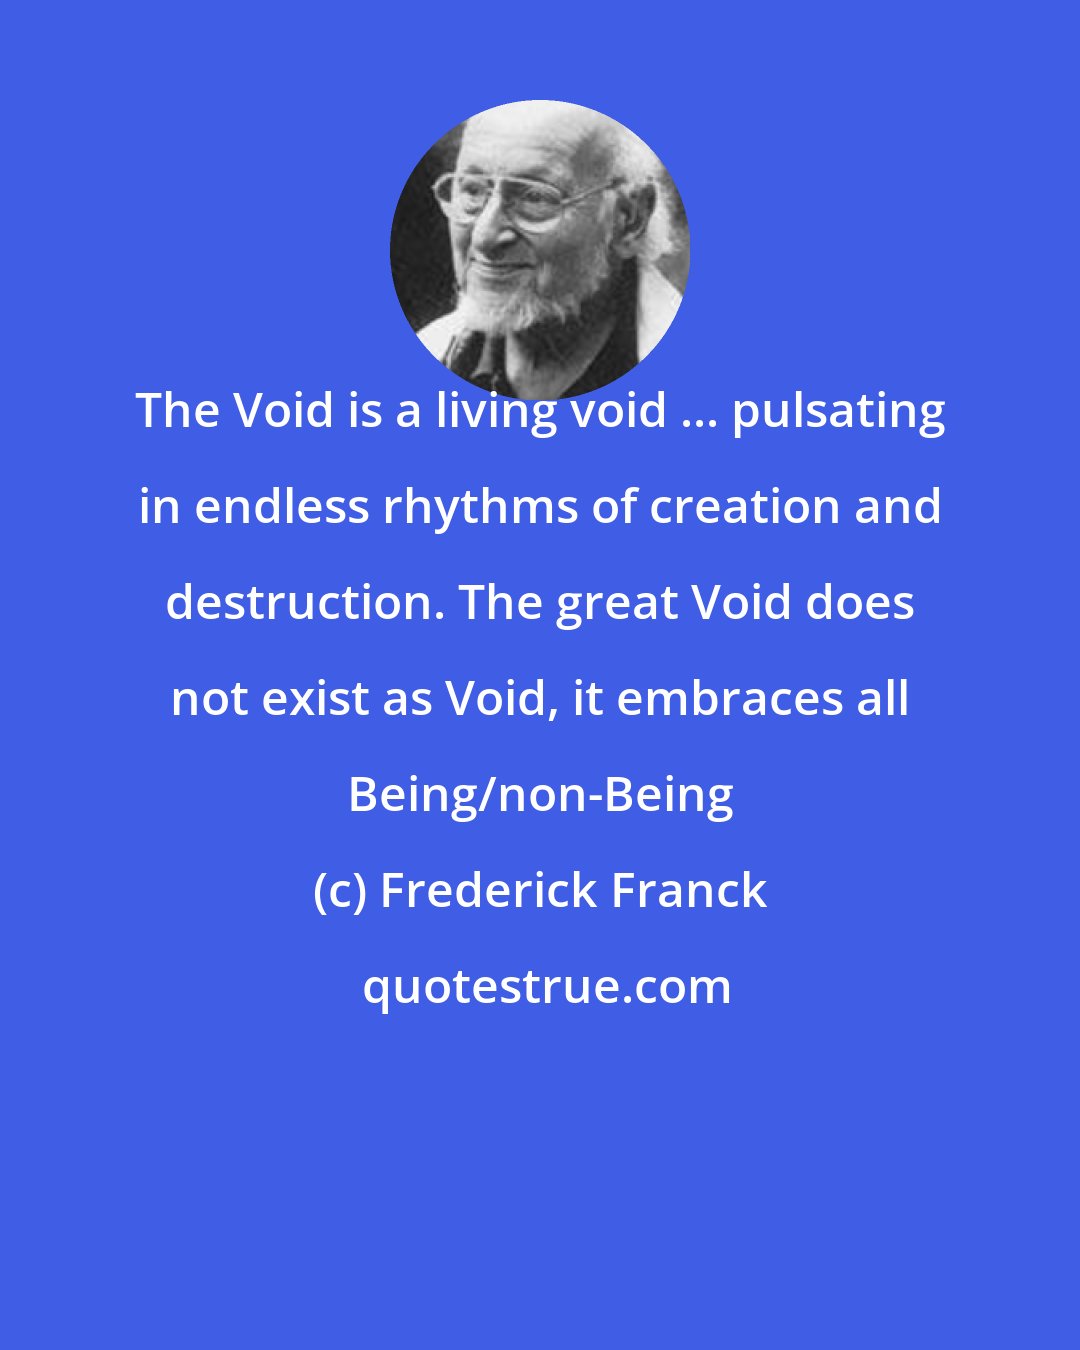 Frederick Franck: The Void is a living void ... pulsating in endless rhythms of creation and destruction. The great Void does not exist as Void, it embraces all Being/non-Being